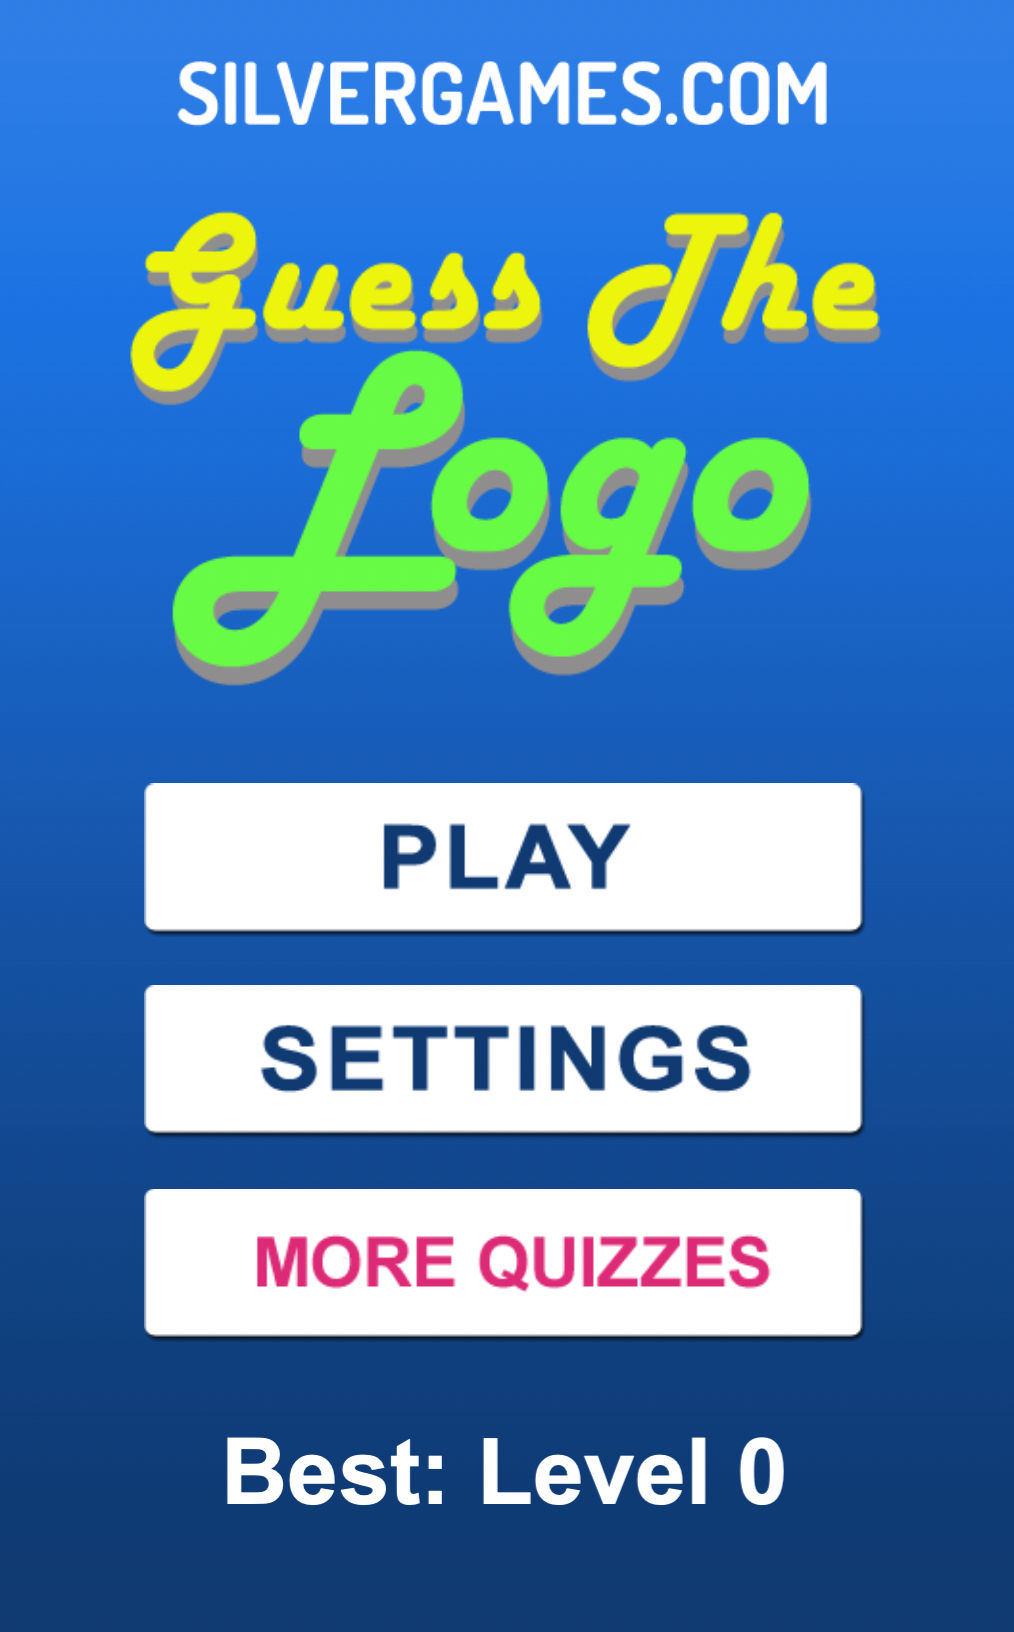 Logo Quiz Guess The Logo Test – Apps on Google Play